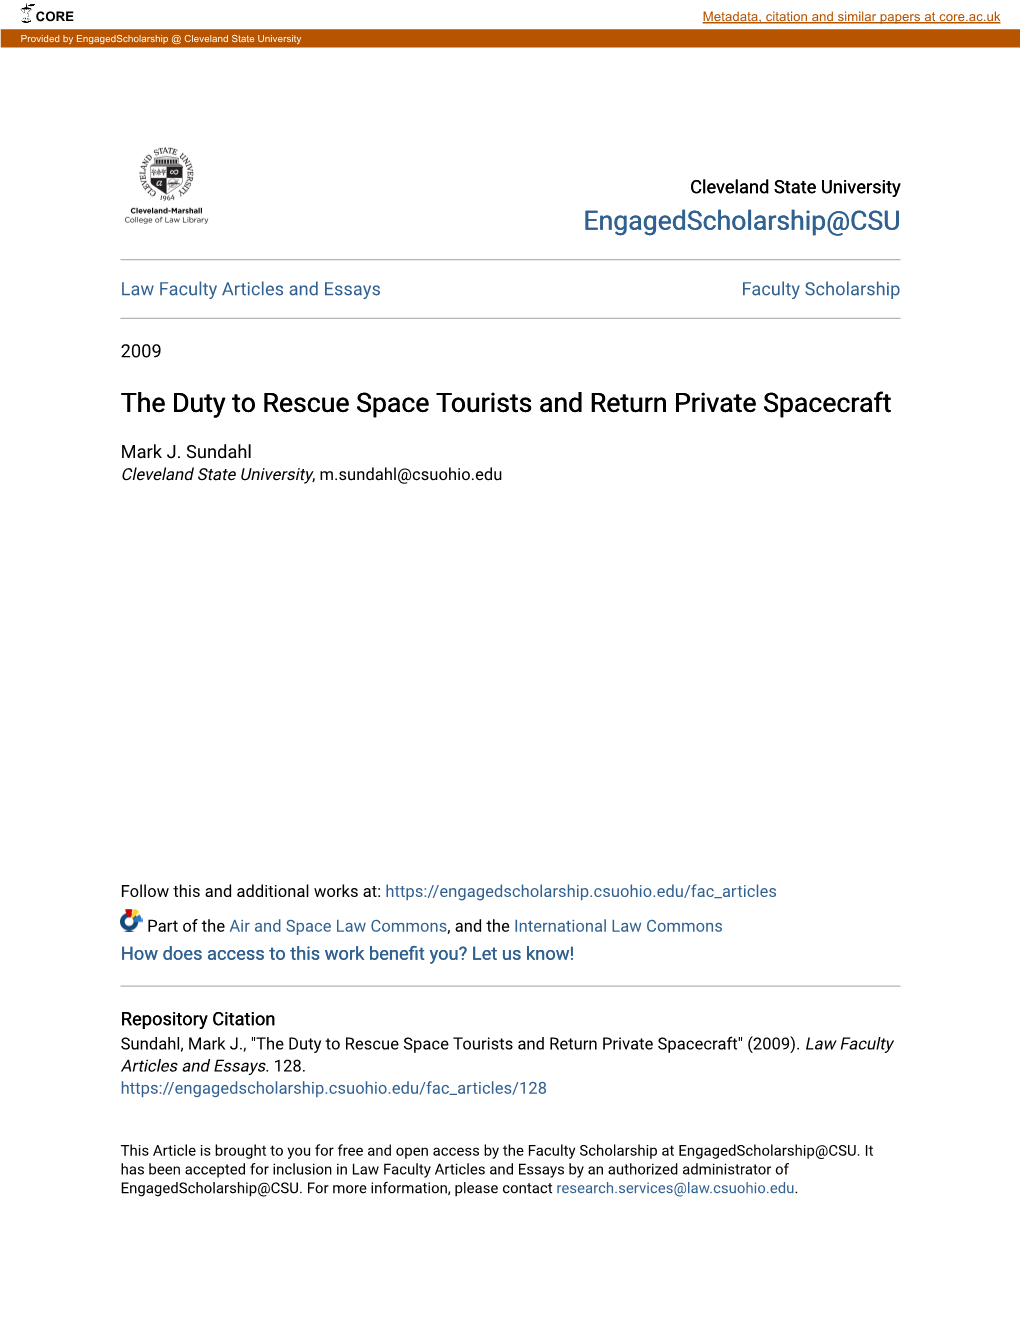 The Duty to Rescue Space Tourists and Return Private Spacecraft